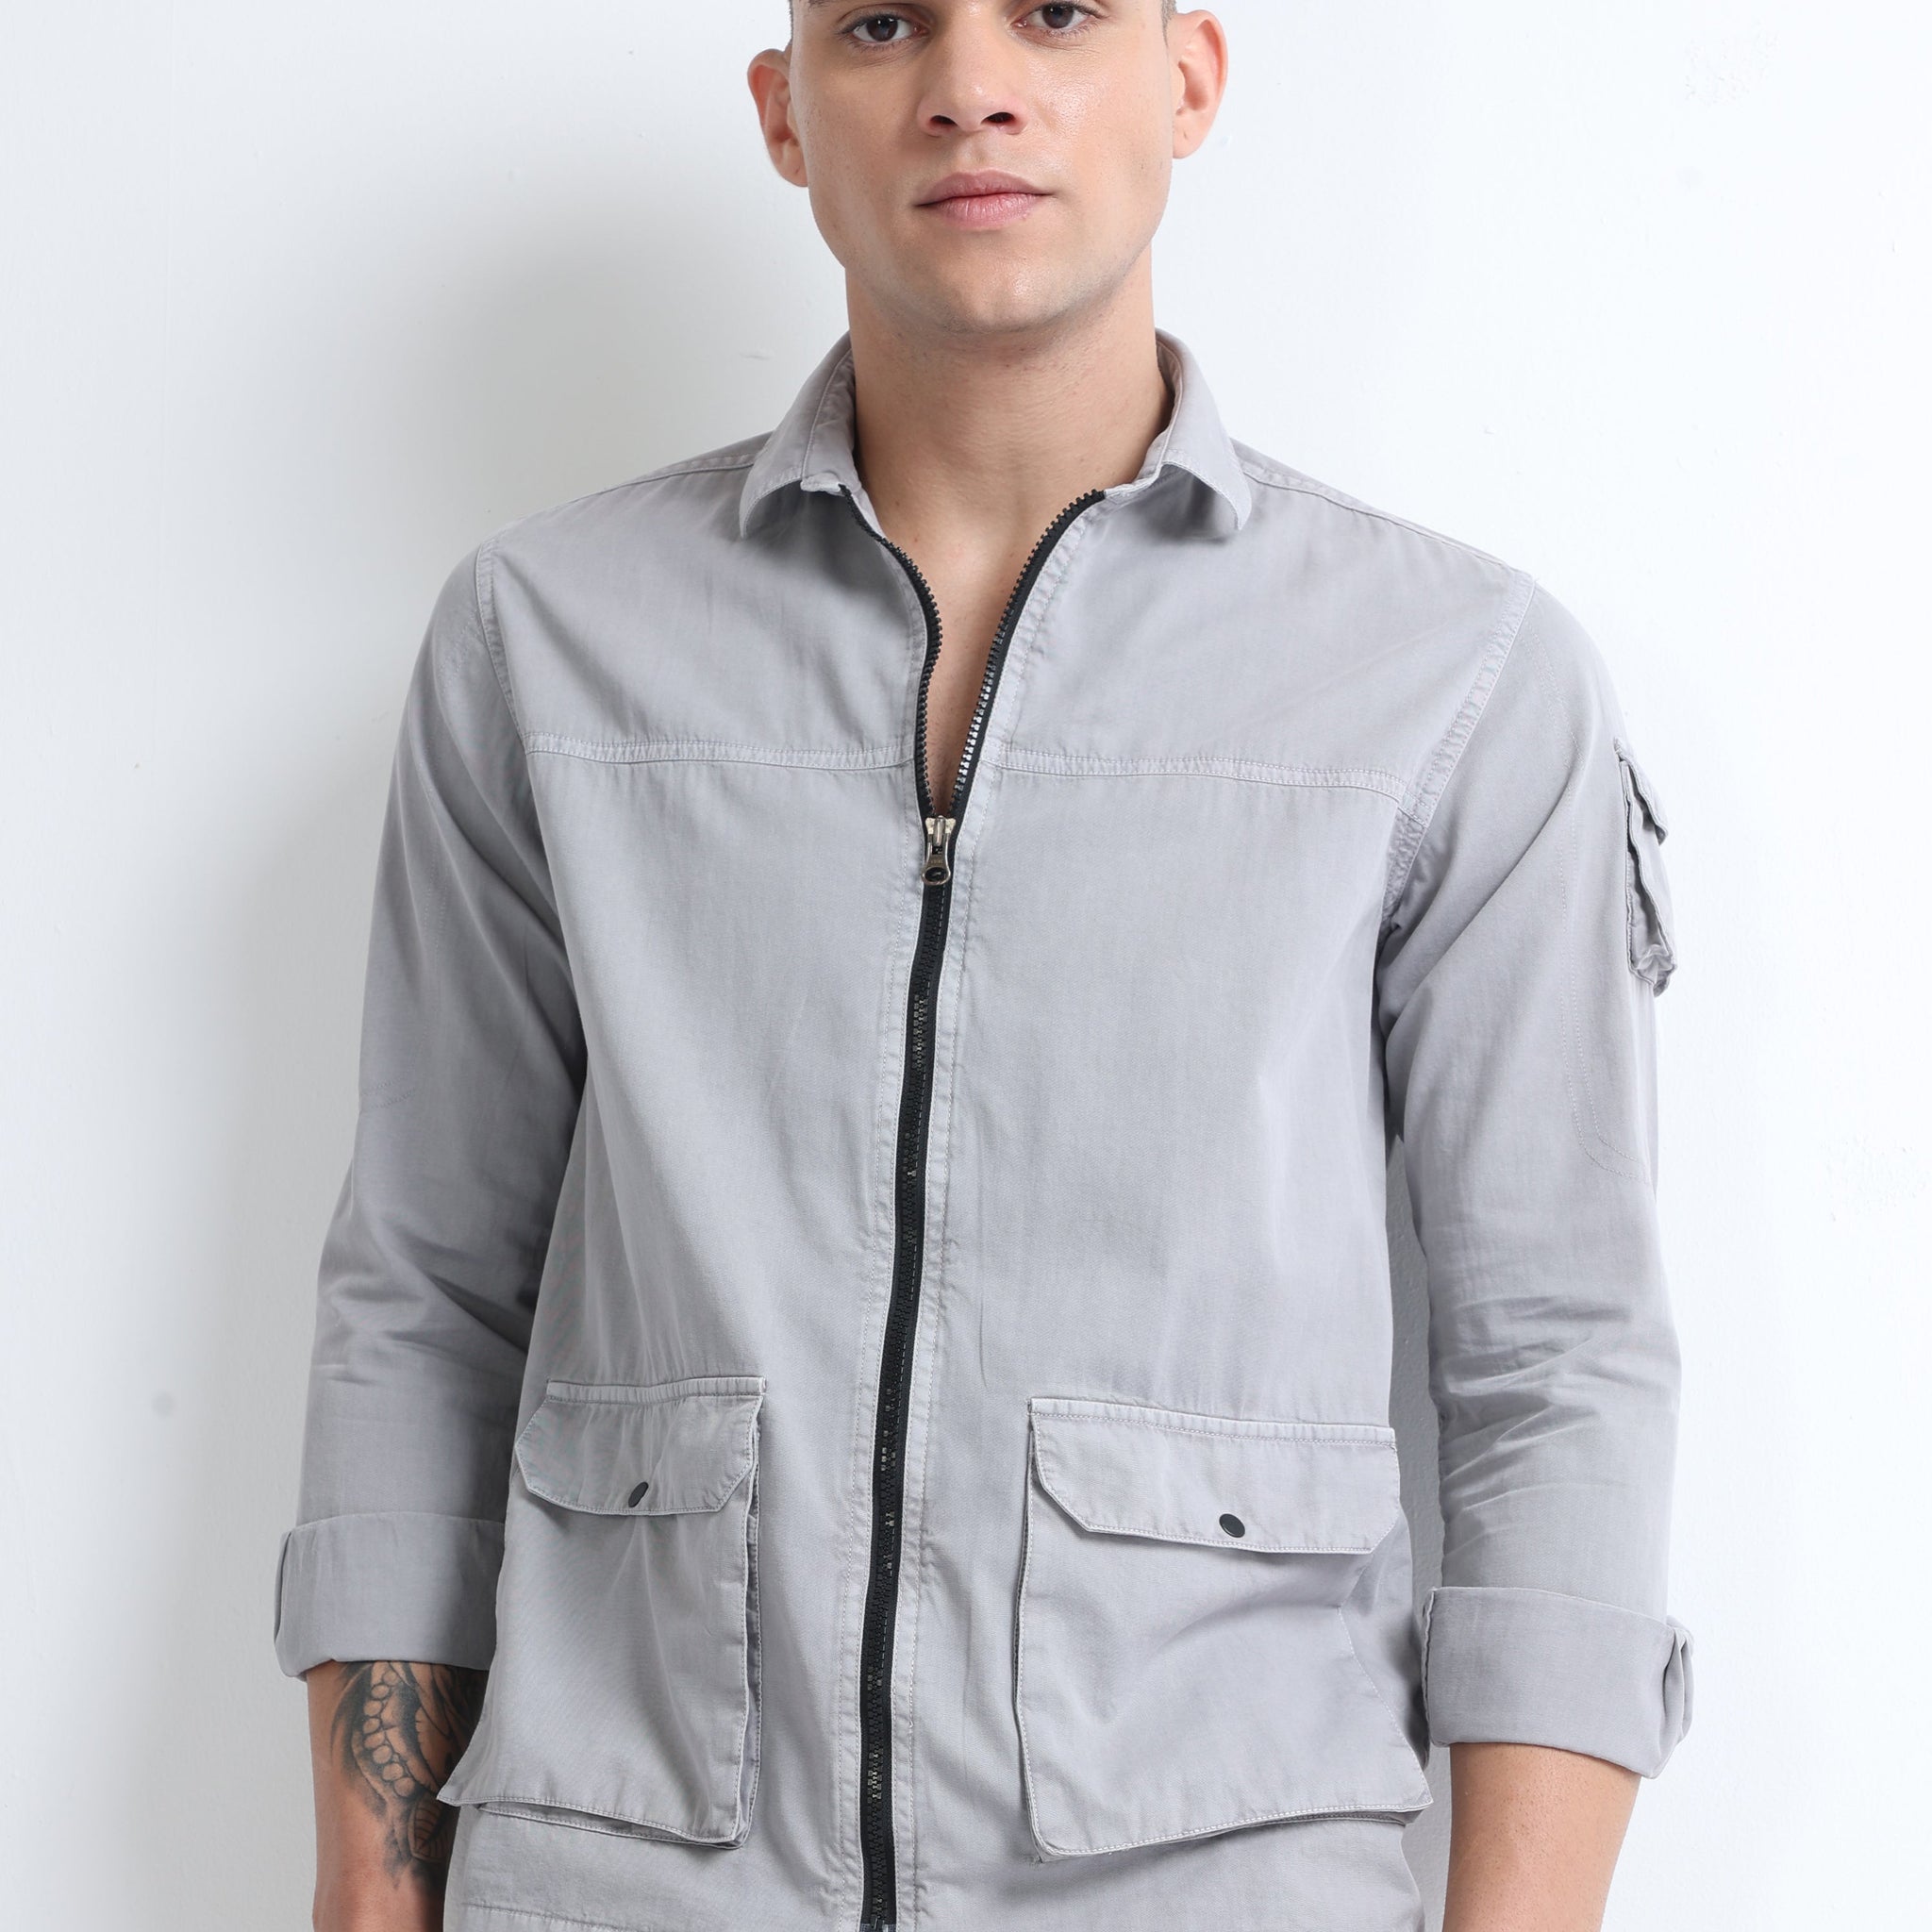 Buy Double Pocket Pull Over Stylish Shirt Online